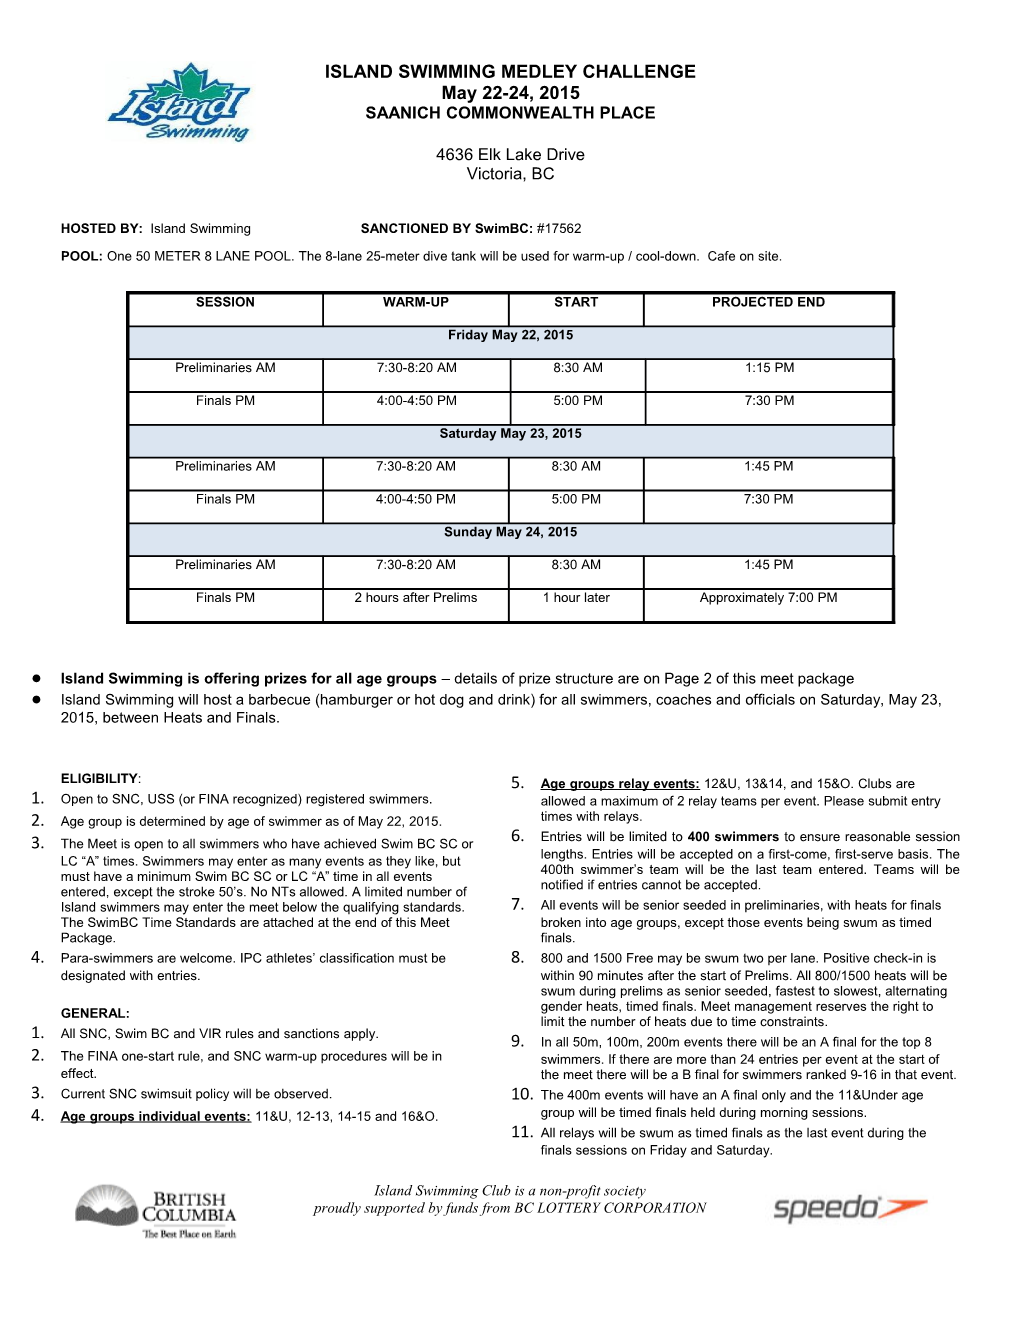 2015 ISA LC Medley Challenge Meet Package Revised